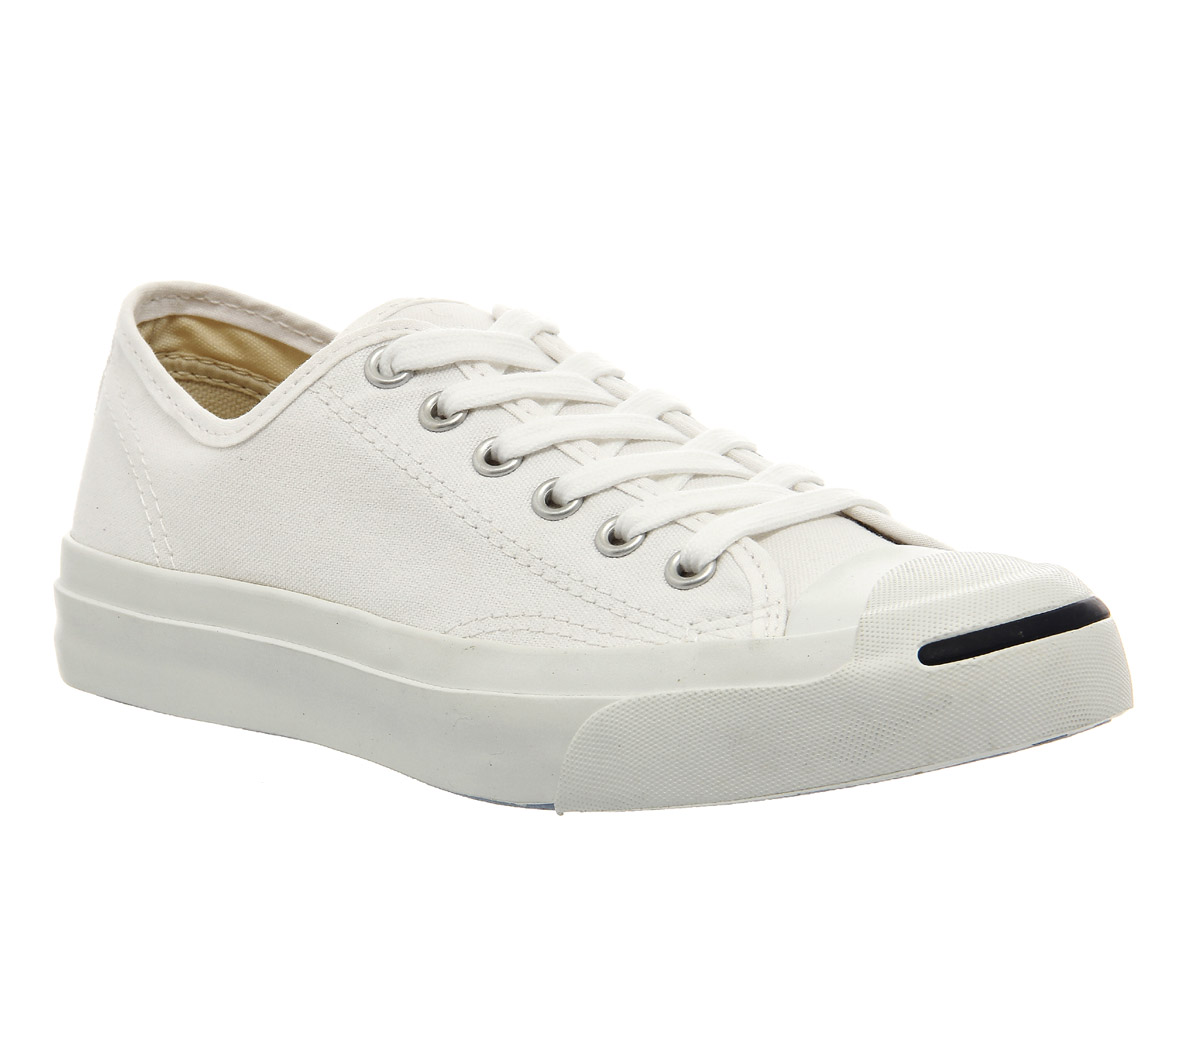 converse jack purcell white uk